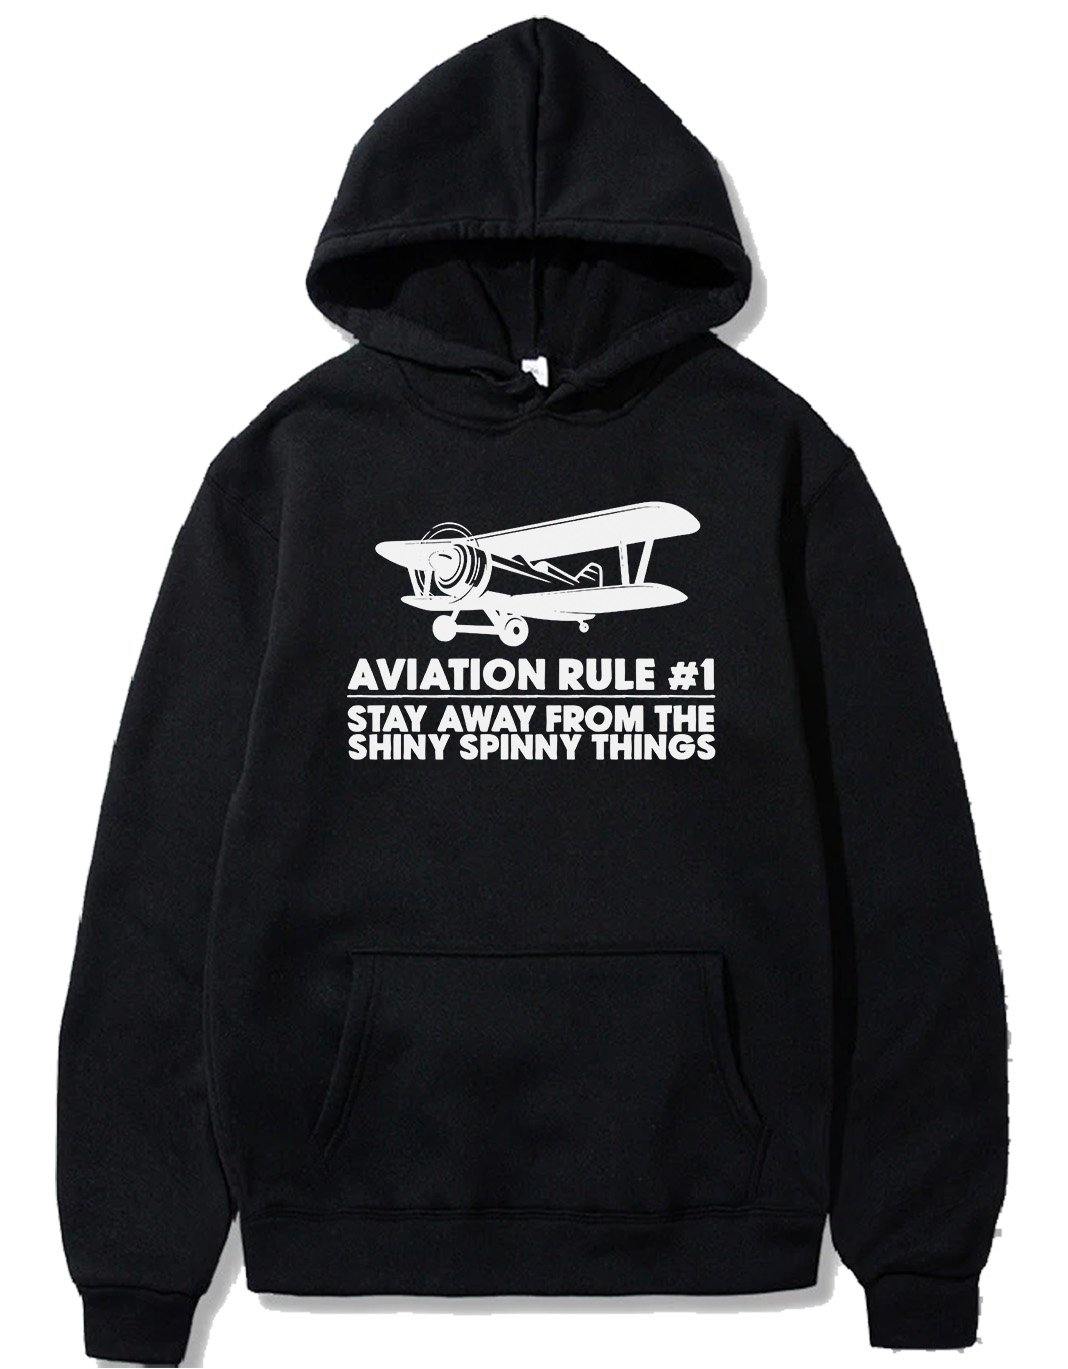 AVIATION RULE #1 STAY ALWAYS FROM THE SHINY SPINNY THINGS PULLOVER THE AV8R